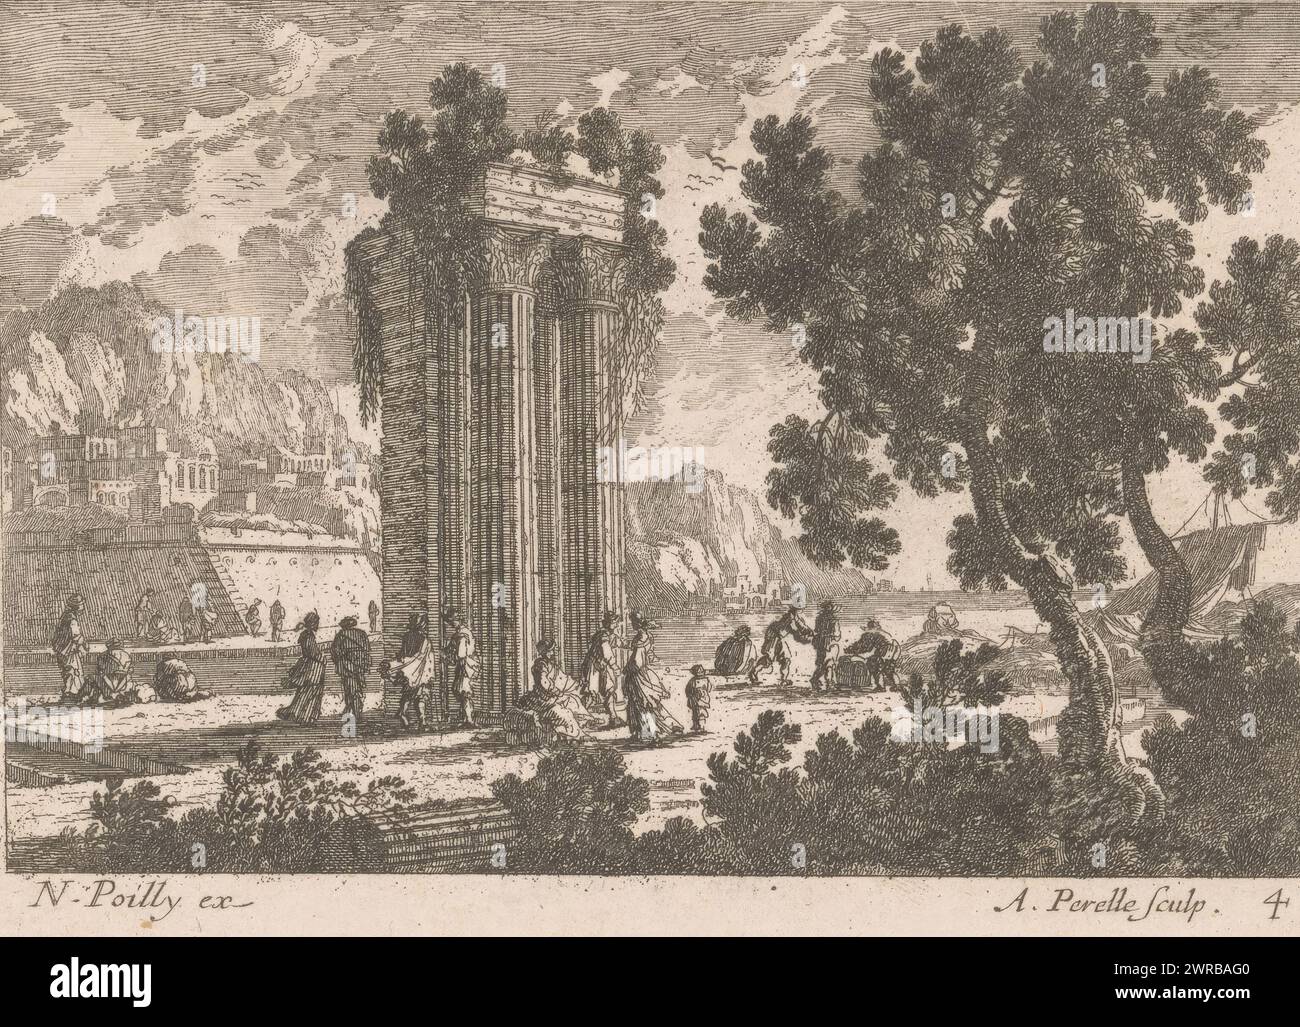 Harbor view with figures near antique pillars, Coastal landscapes (series title), numbered bottom right: 4., print maker: Adam Perelle, publisher: Nicolas de Poilly (I), Paris, 1650 - 1695, paper, etching, height 115 mm × width 160 mm, print Stock Photo